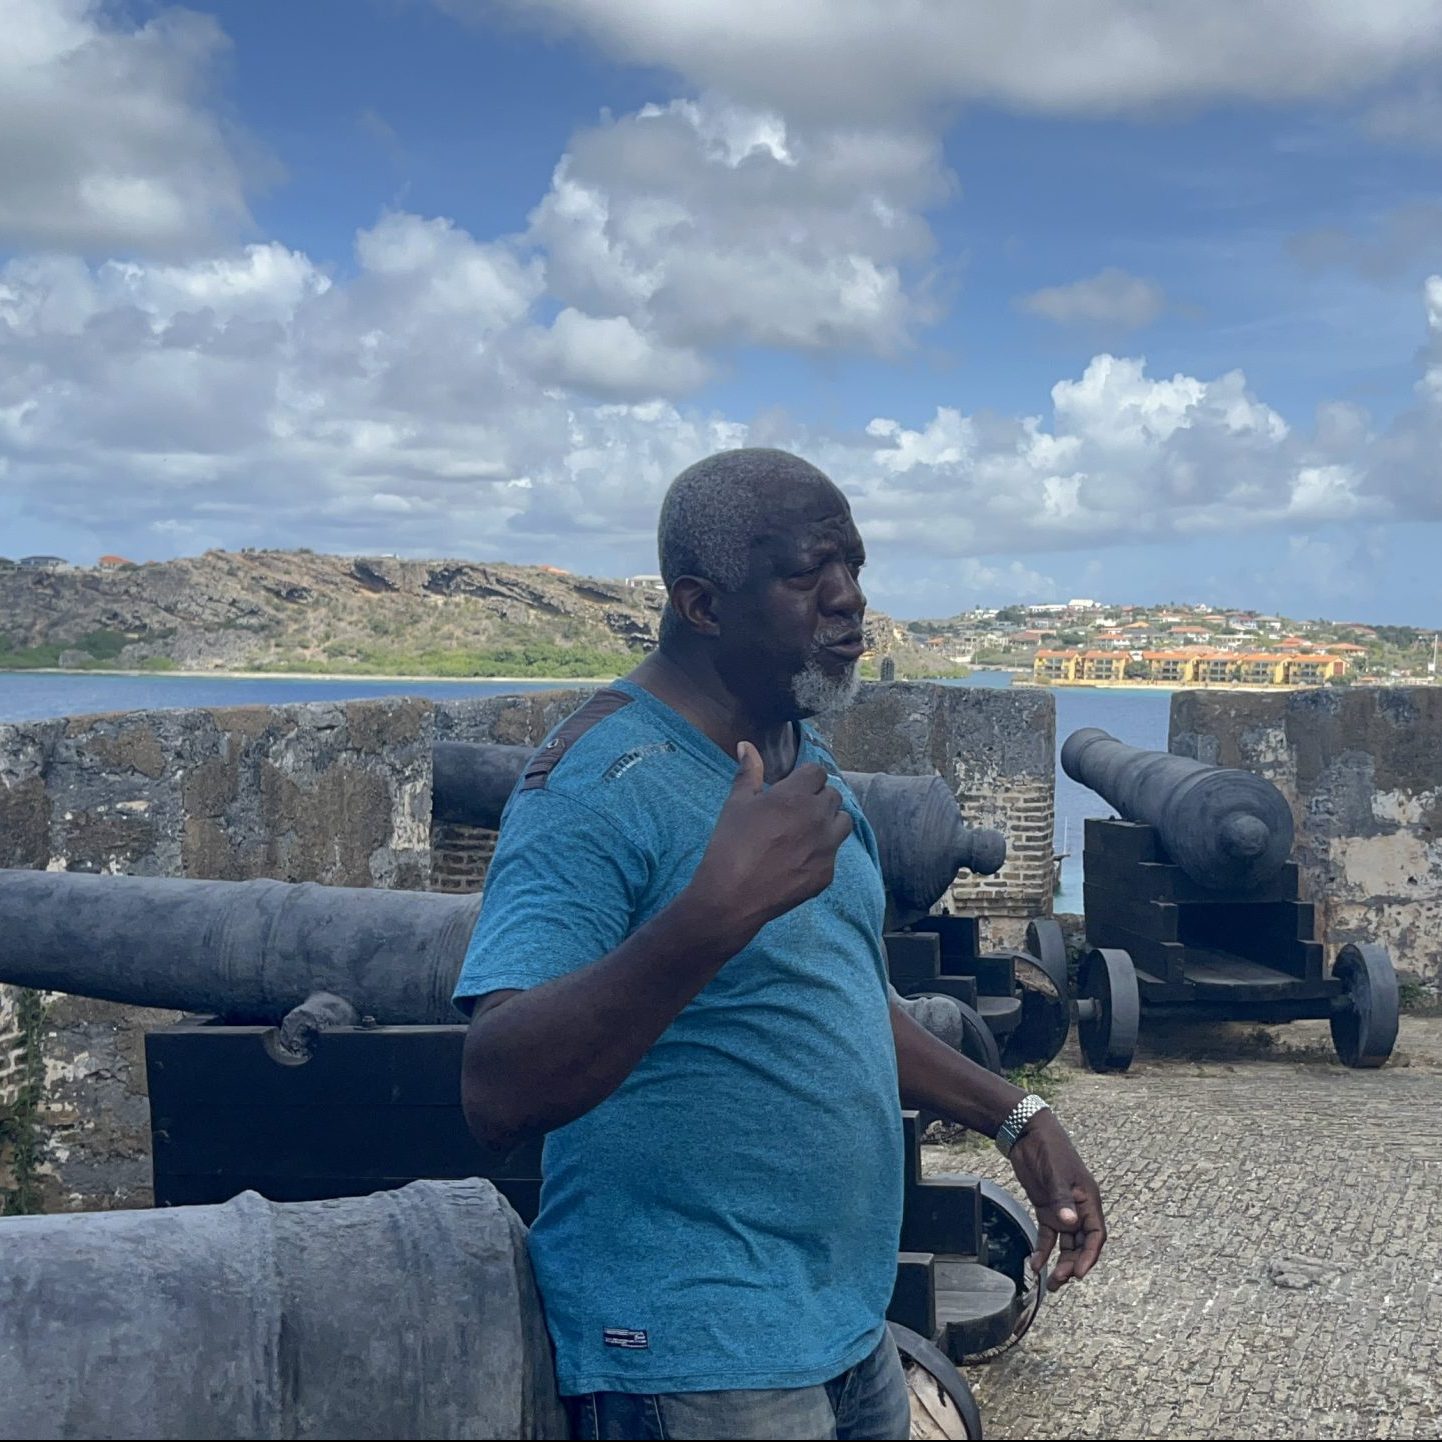 tours curacao - curacao island tours - curacao island tour - curacao day tours- private tours curacao best tours in curacao clemenciatours